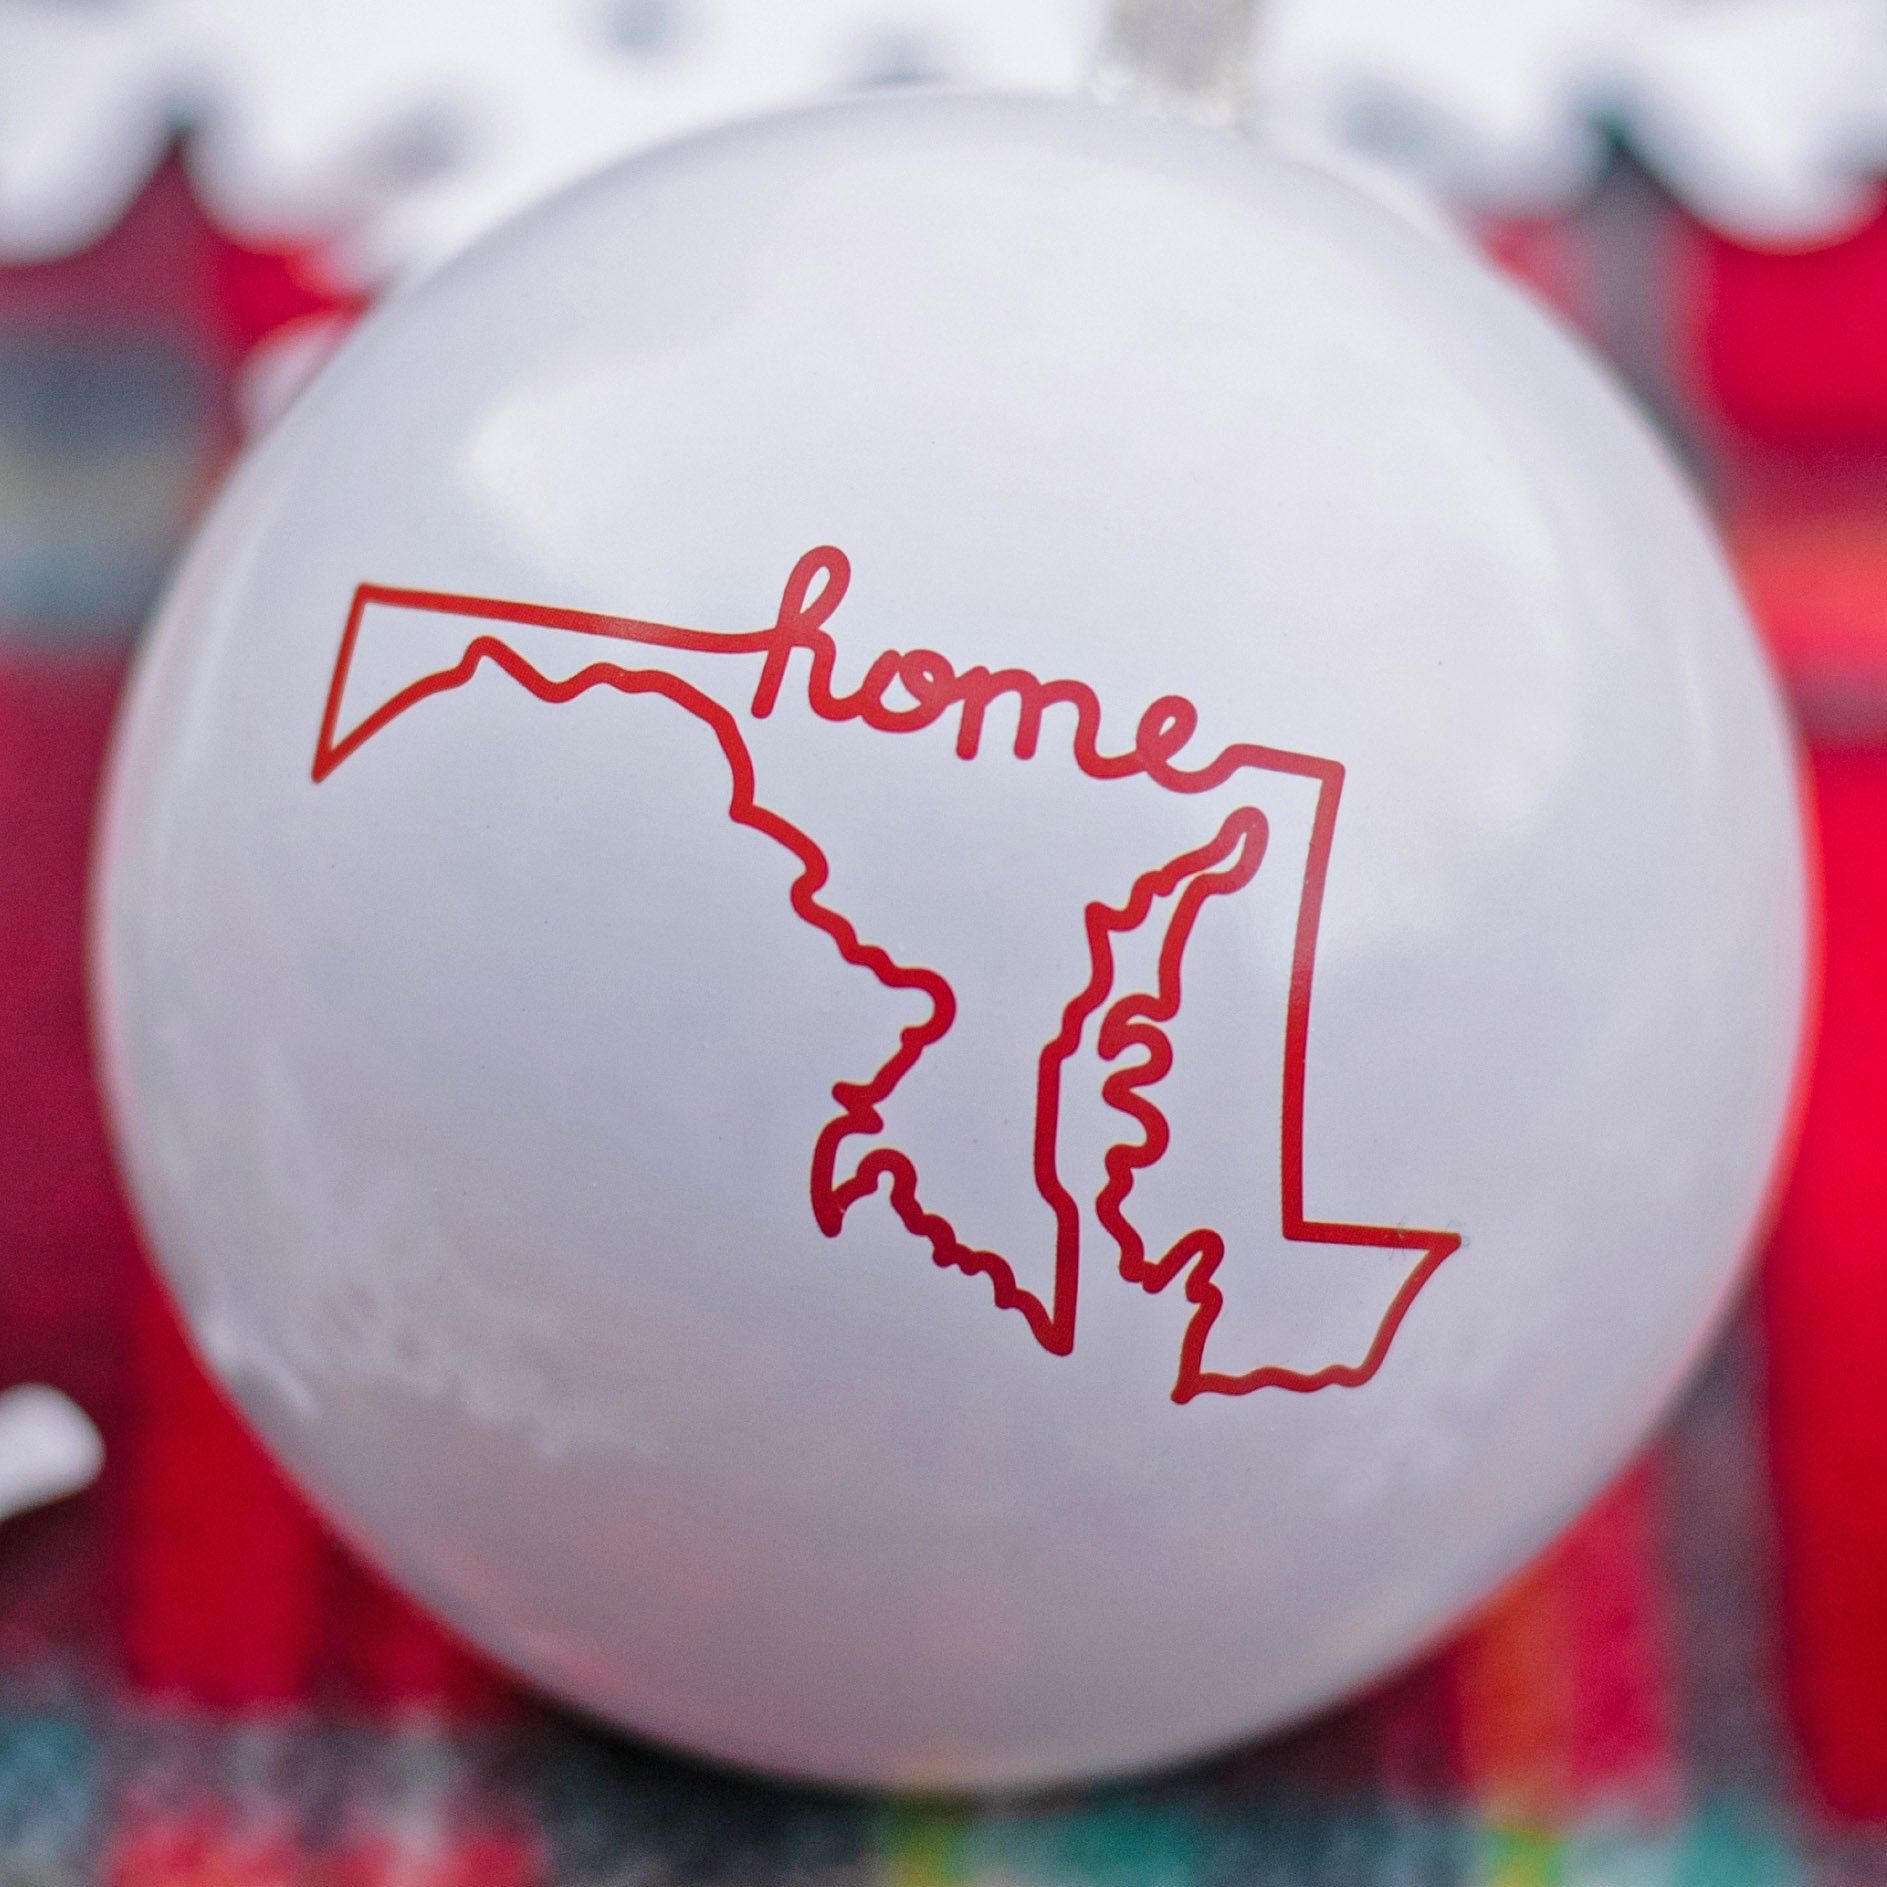 Maryland Home (White) / Tin Ball Ornament - Route One Apparel